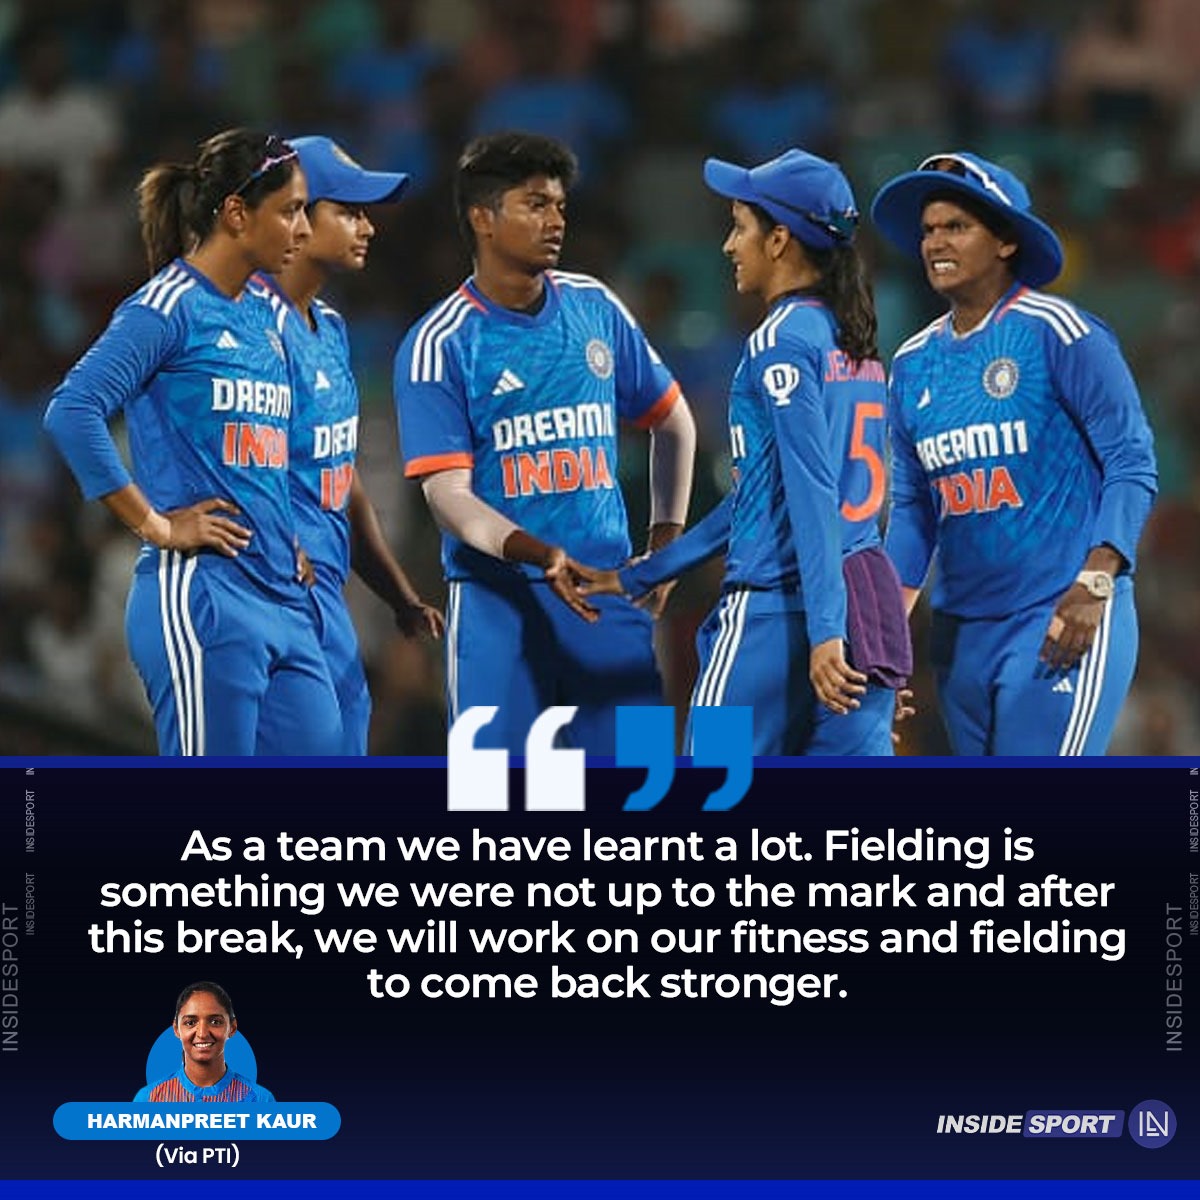 The skipper acknowledges the areas for improvement 

#HarmanpreetKaur #INDWvAUSW #Insidesport #CricketTwitter